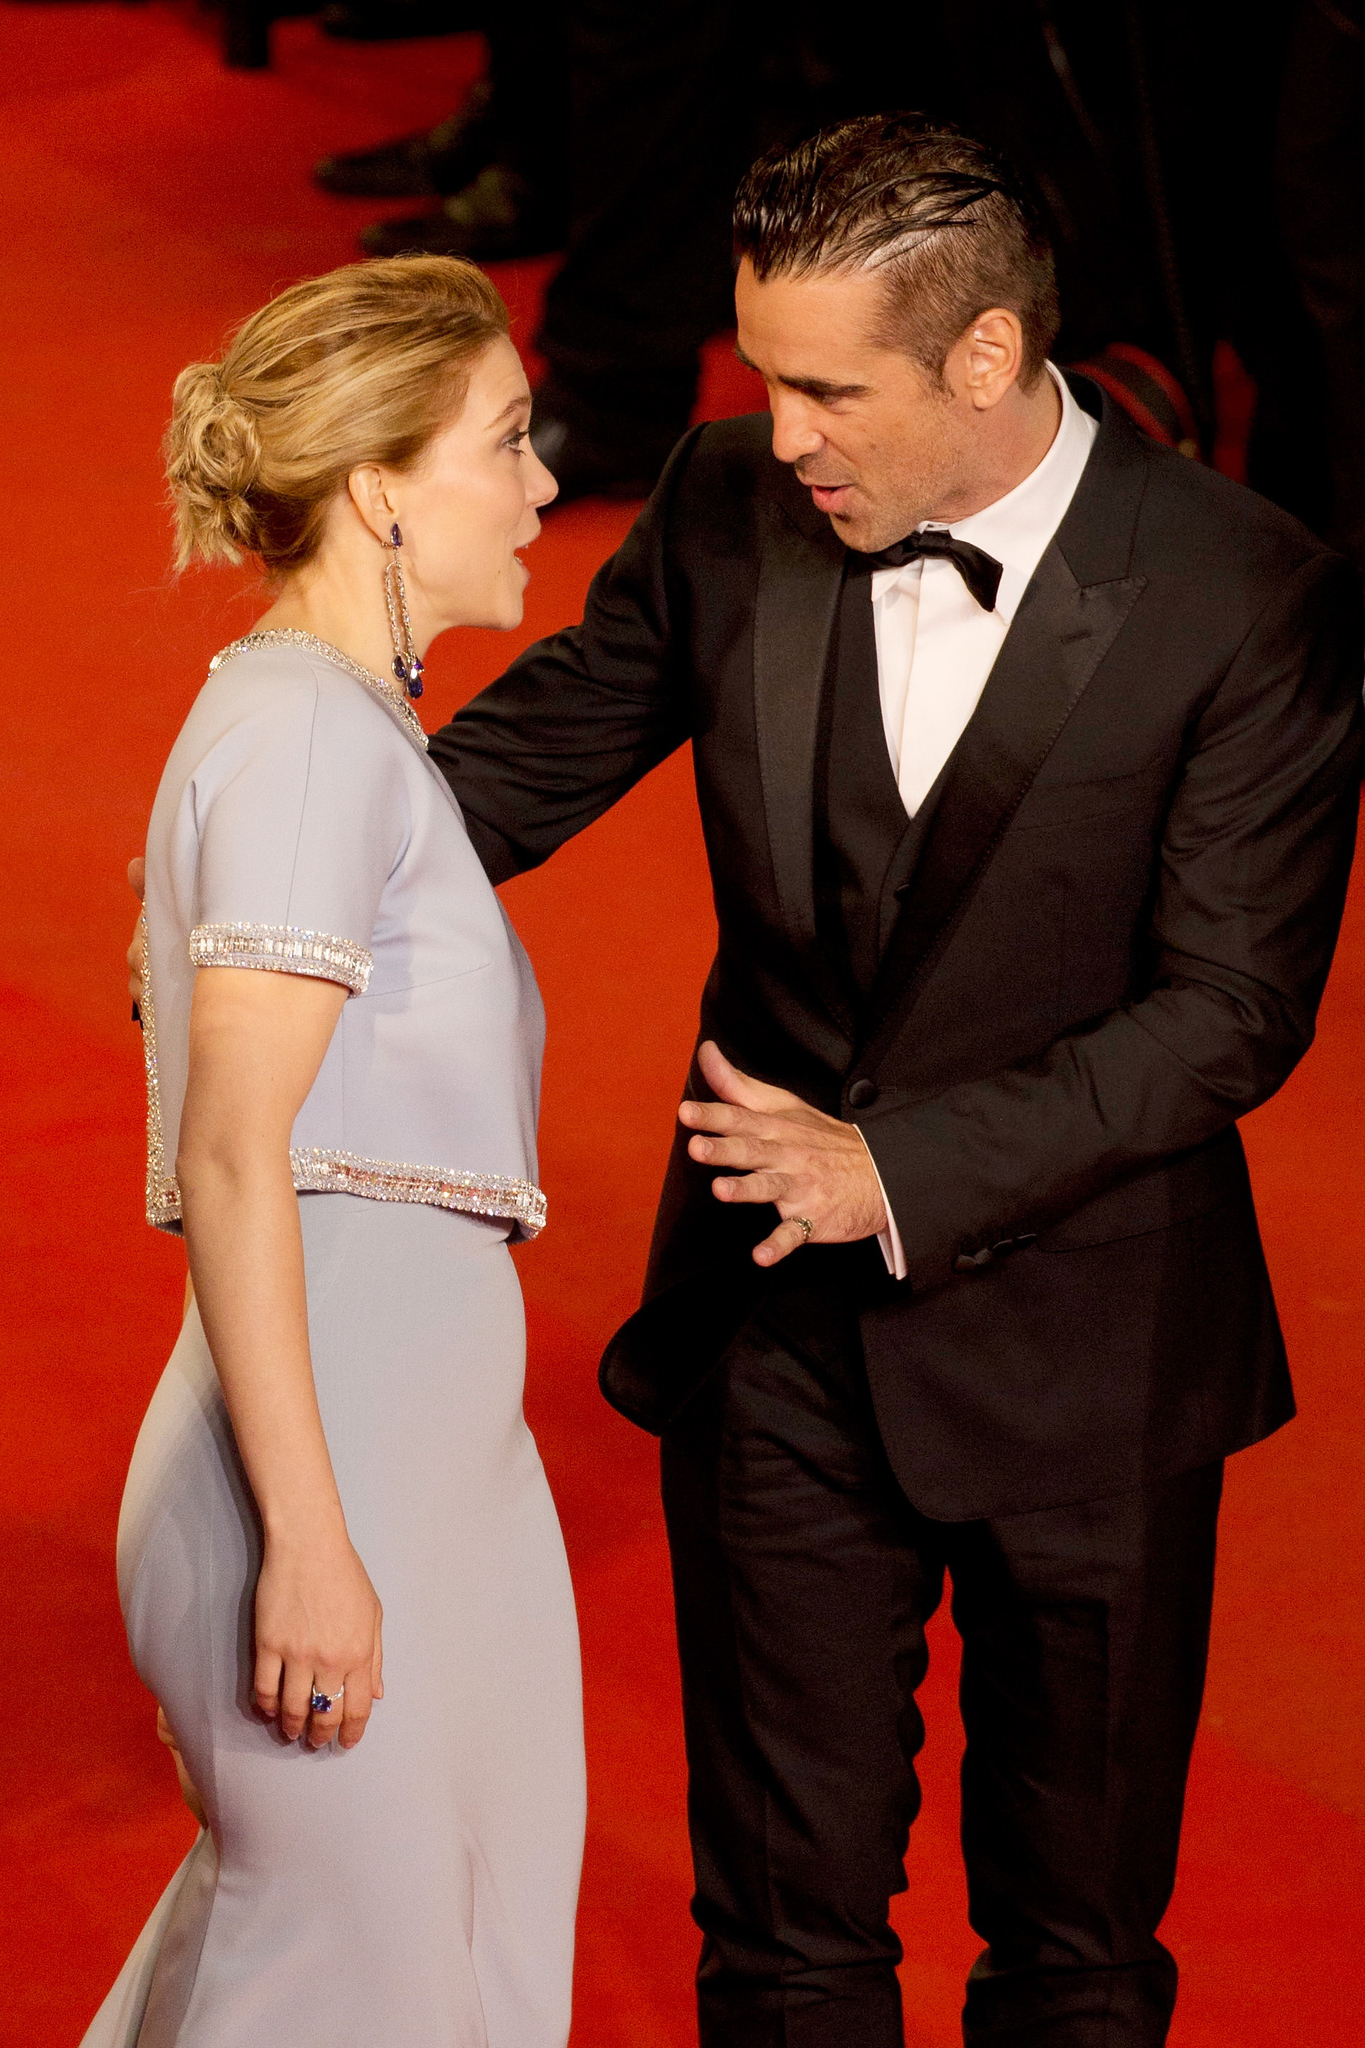 Colin Farrell and Léa Seydoux at event of The Lobster (2015)